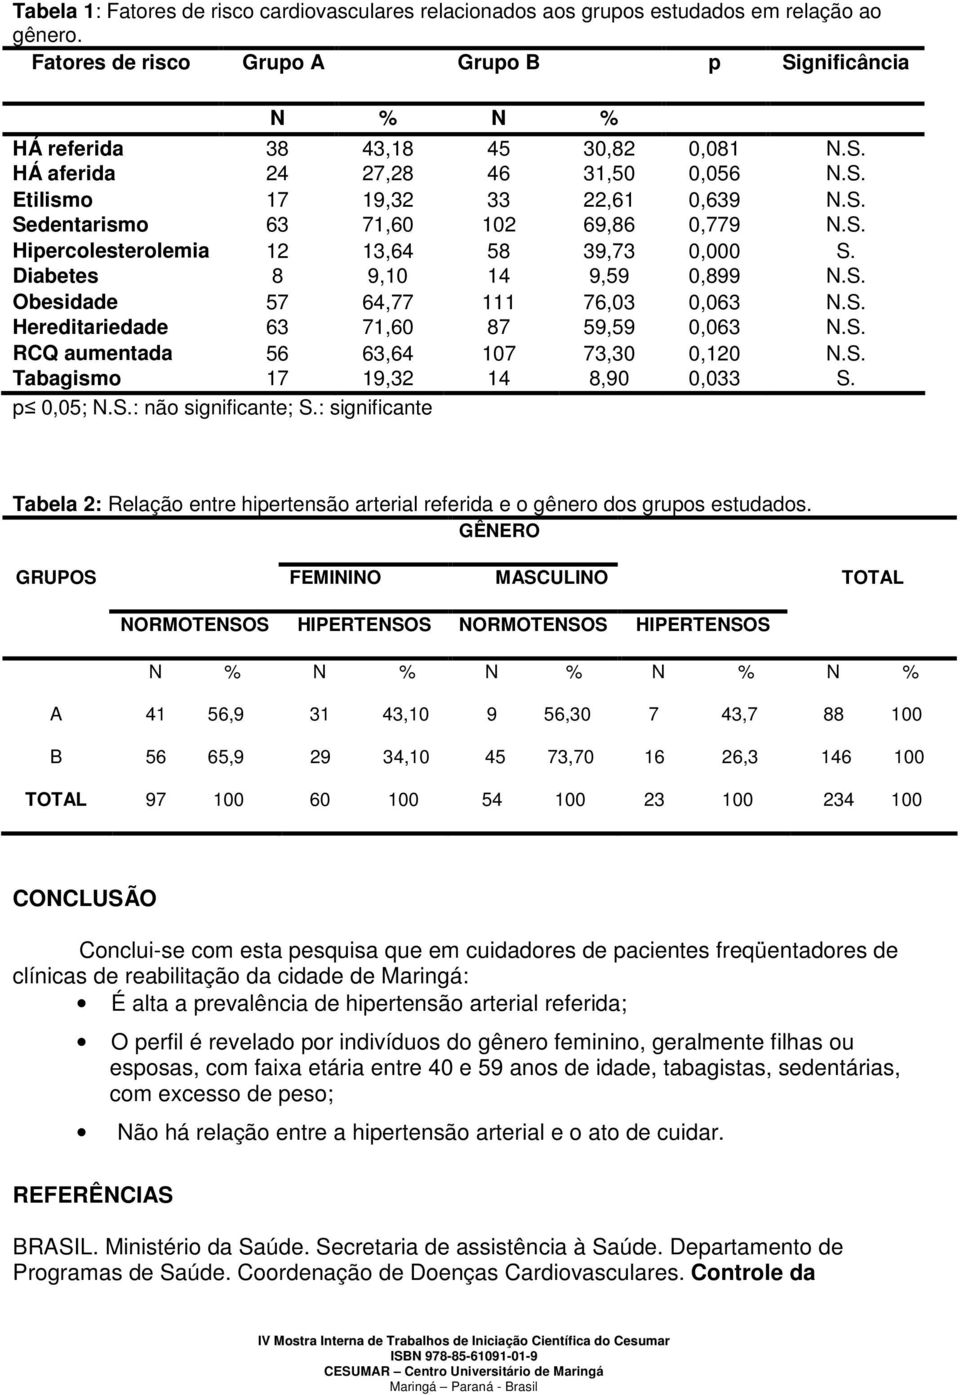 S. Hereditariedade 63 71,60 87 59,59 0,063 N.S. RCQ aumentada 56 63,64 107 73,30 0,120 N.S. Tabagismo 17 19,32 14 8,90 0,033 S. p 0,05; N.S.: não significante; S.